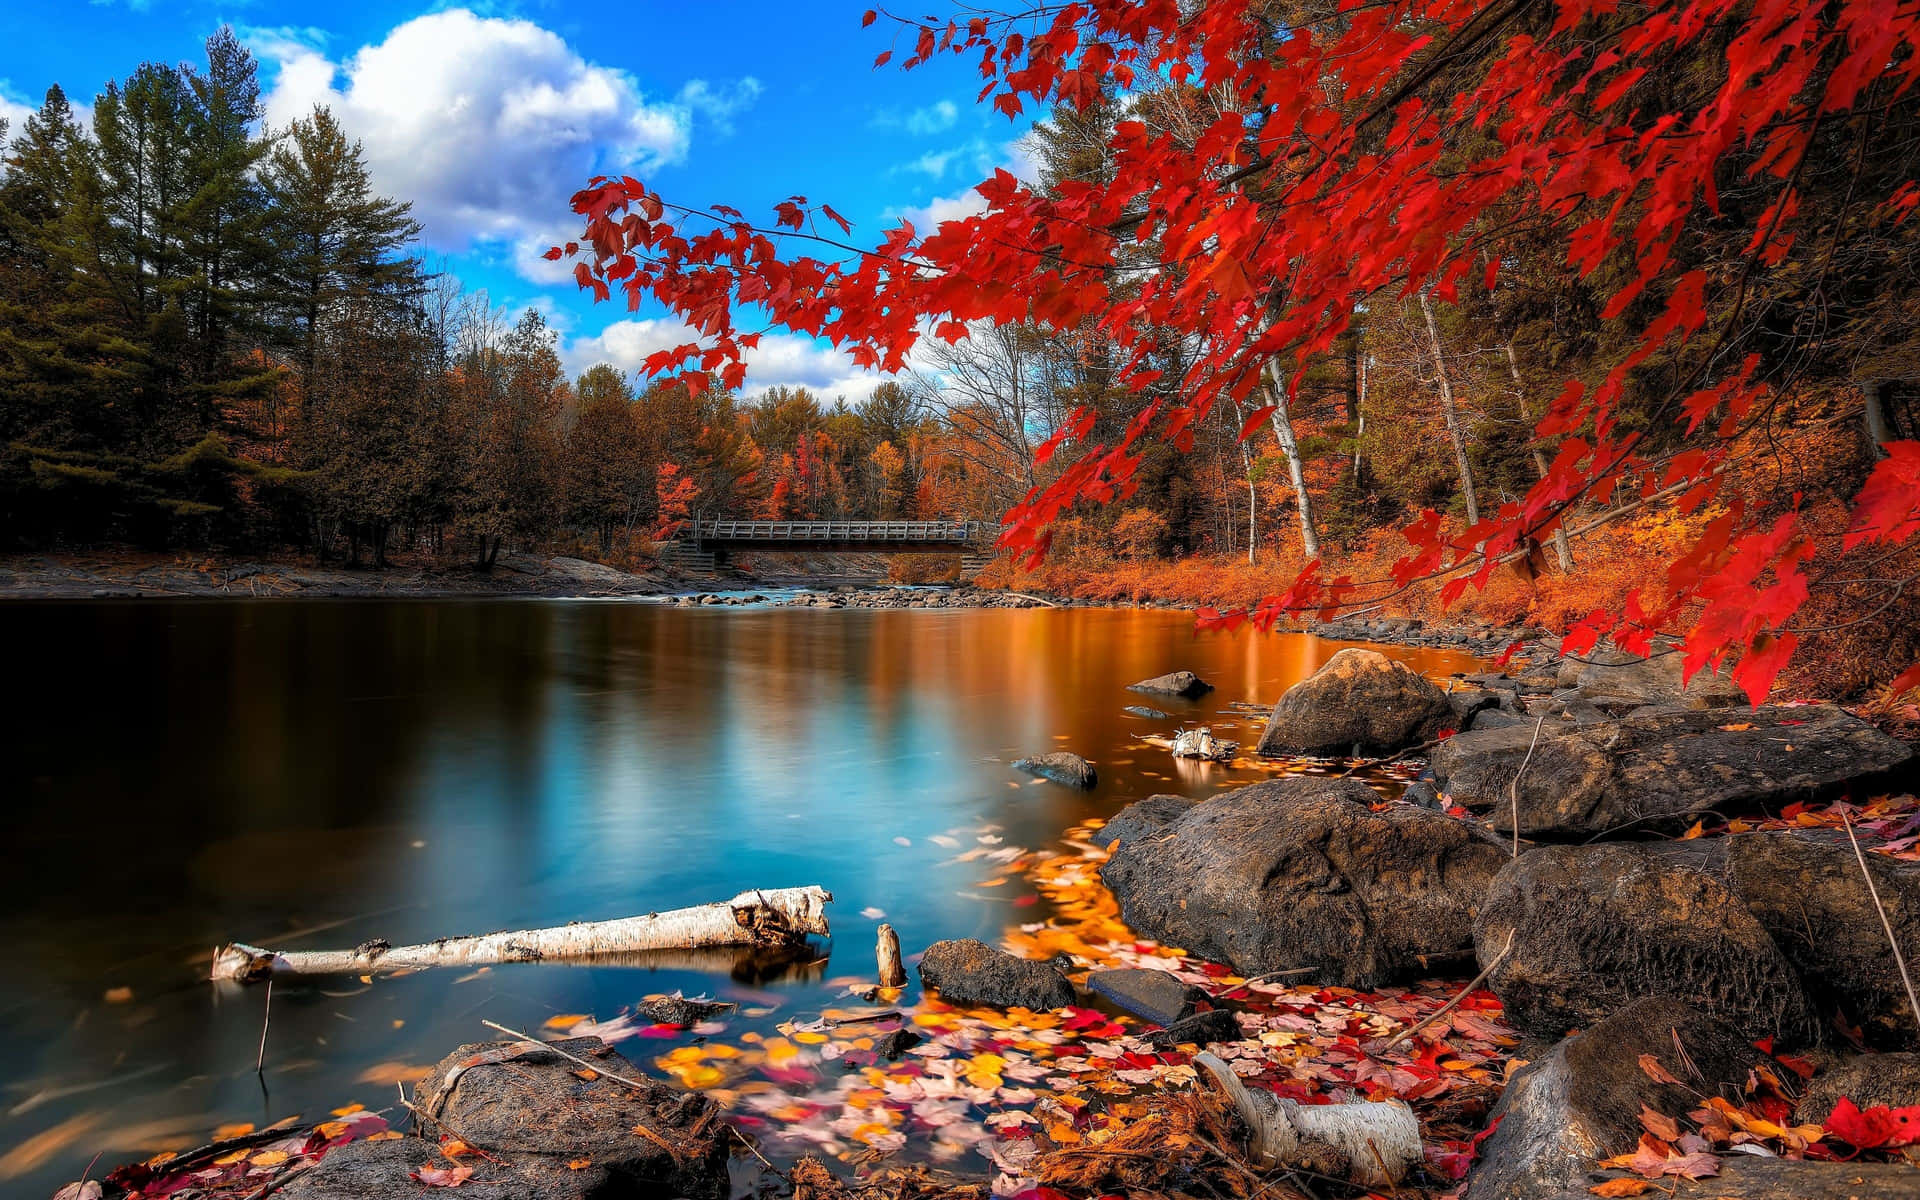 Enjoy the beauty of Fall with this stunning scene Wallpaper